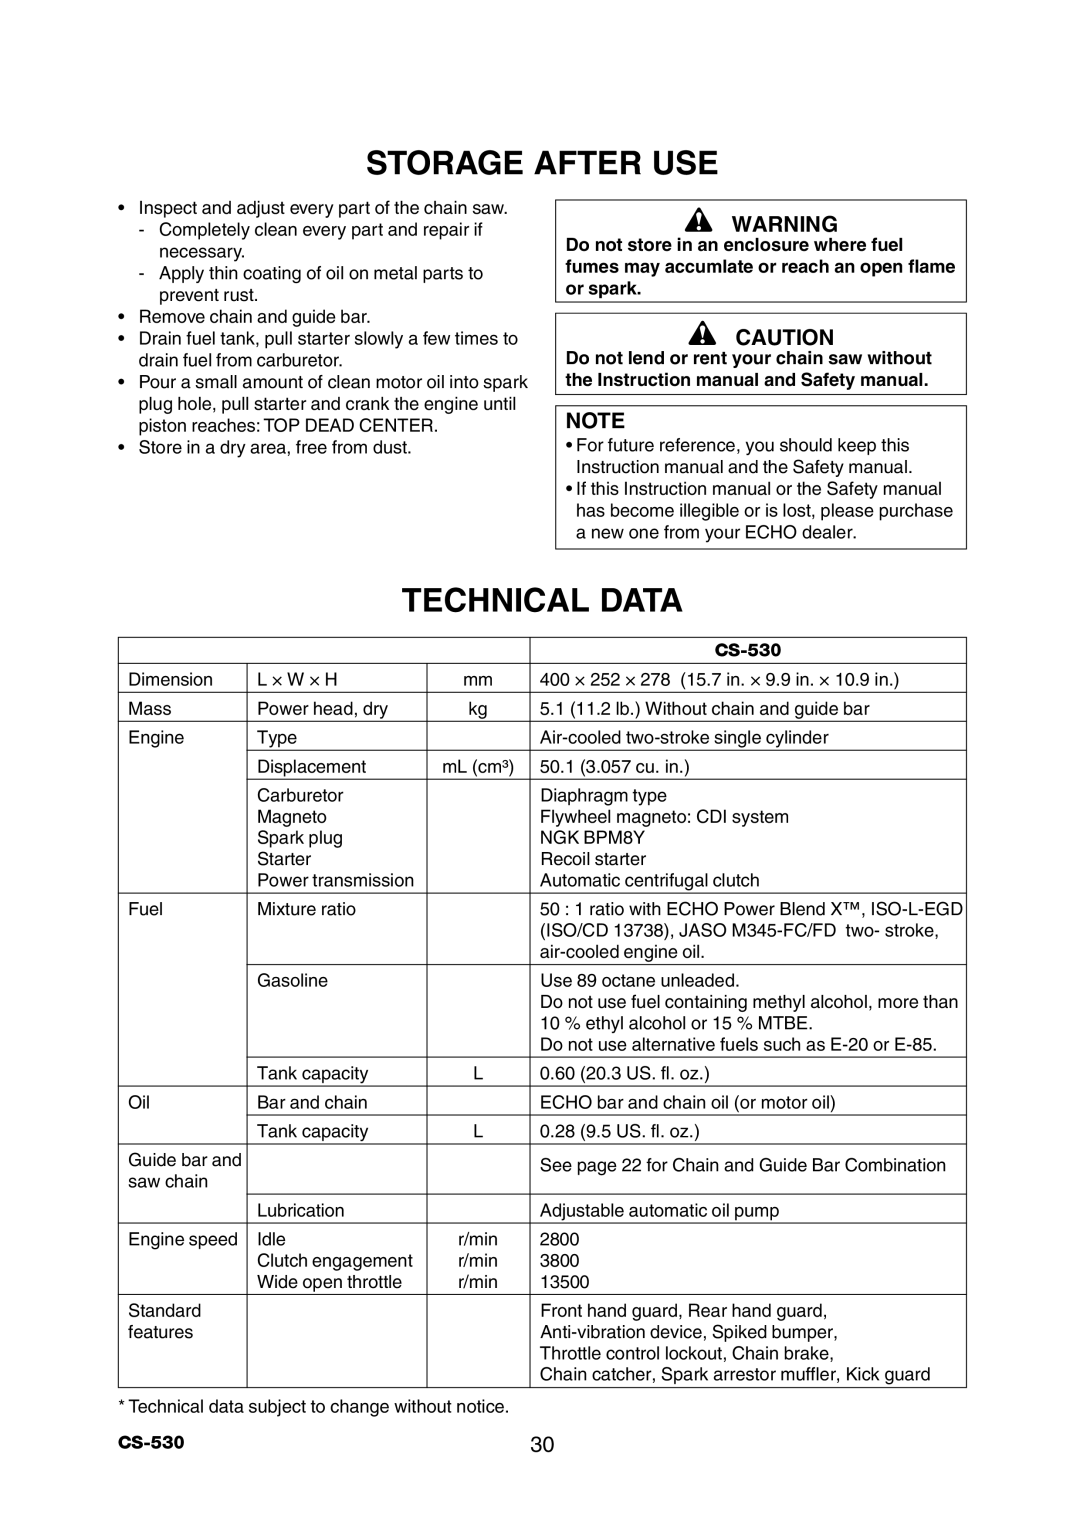 Echo CS-530 instruction manual Storage After Use, Technical Data 